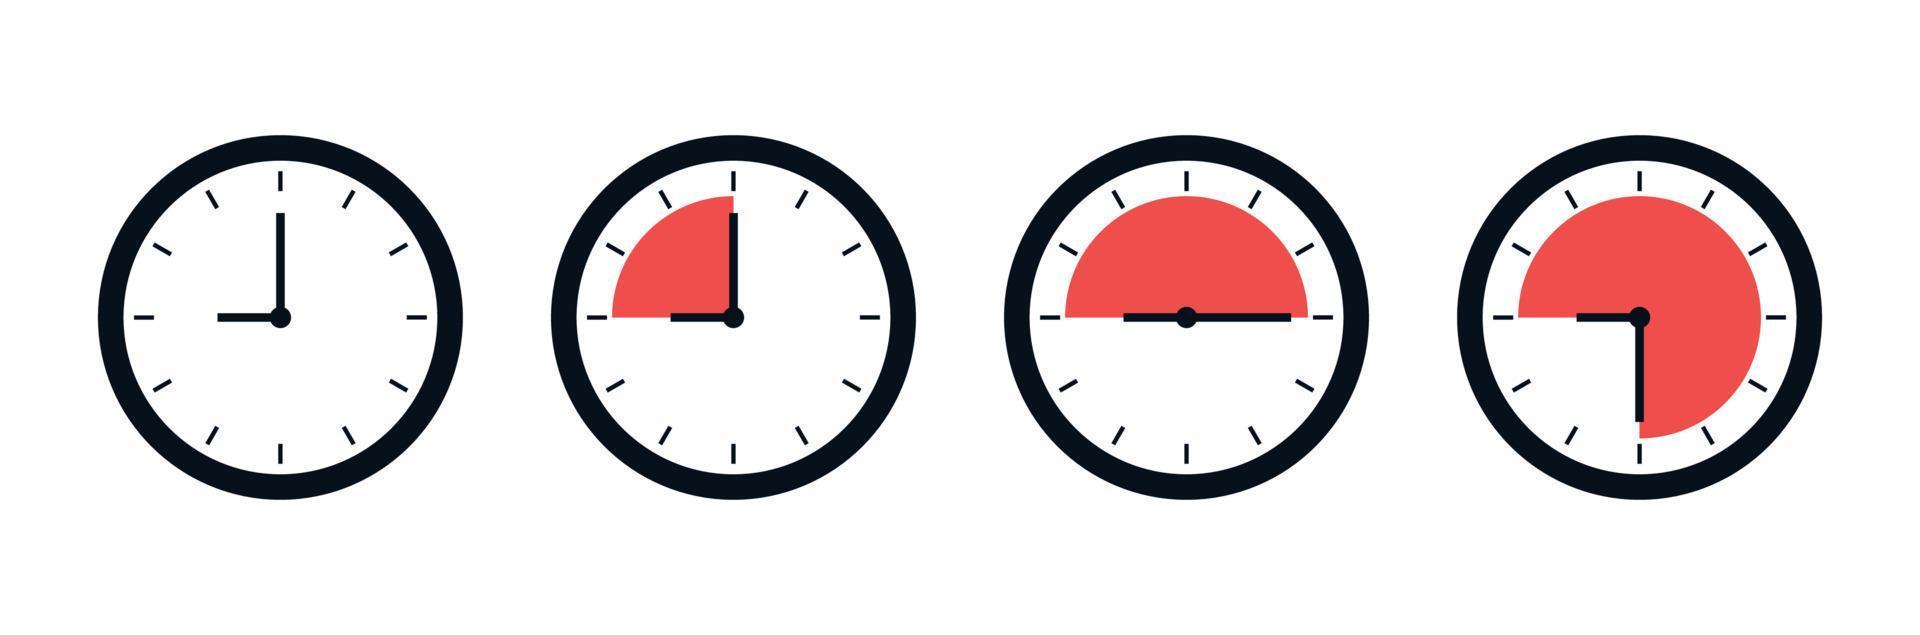 Set of simple clocks and time collection flat vector illustration.